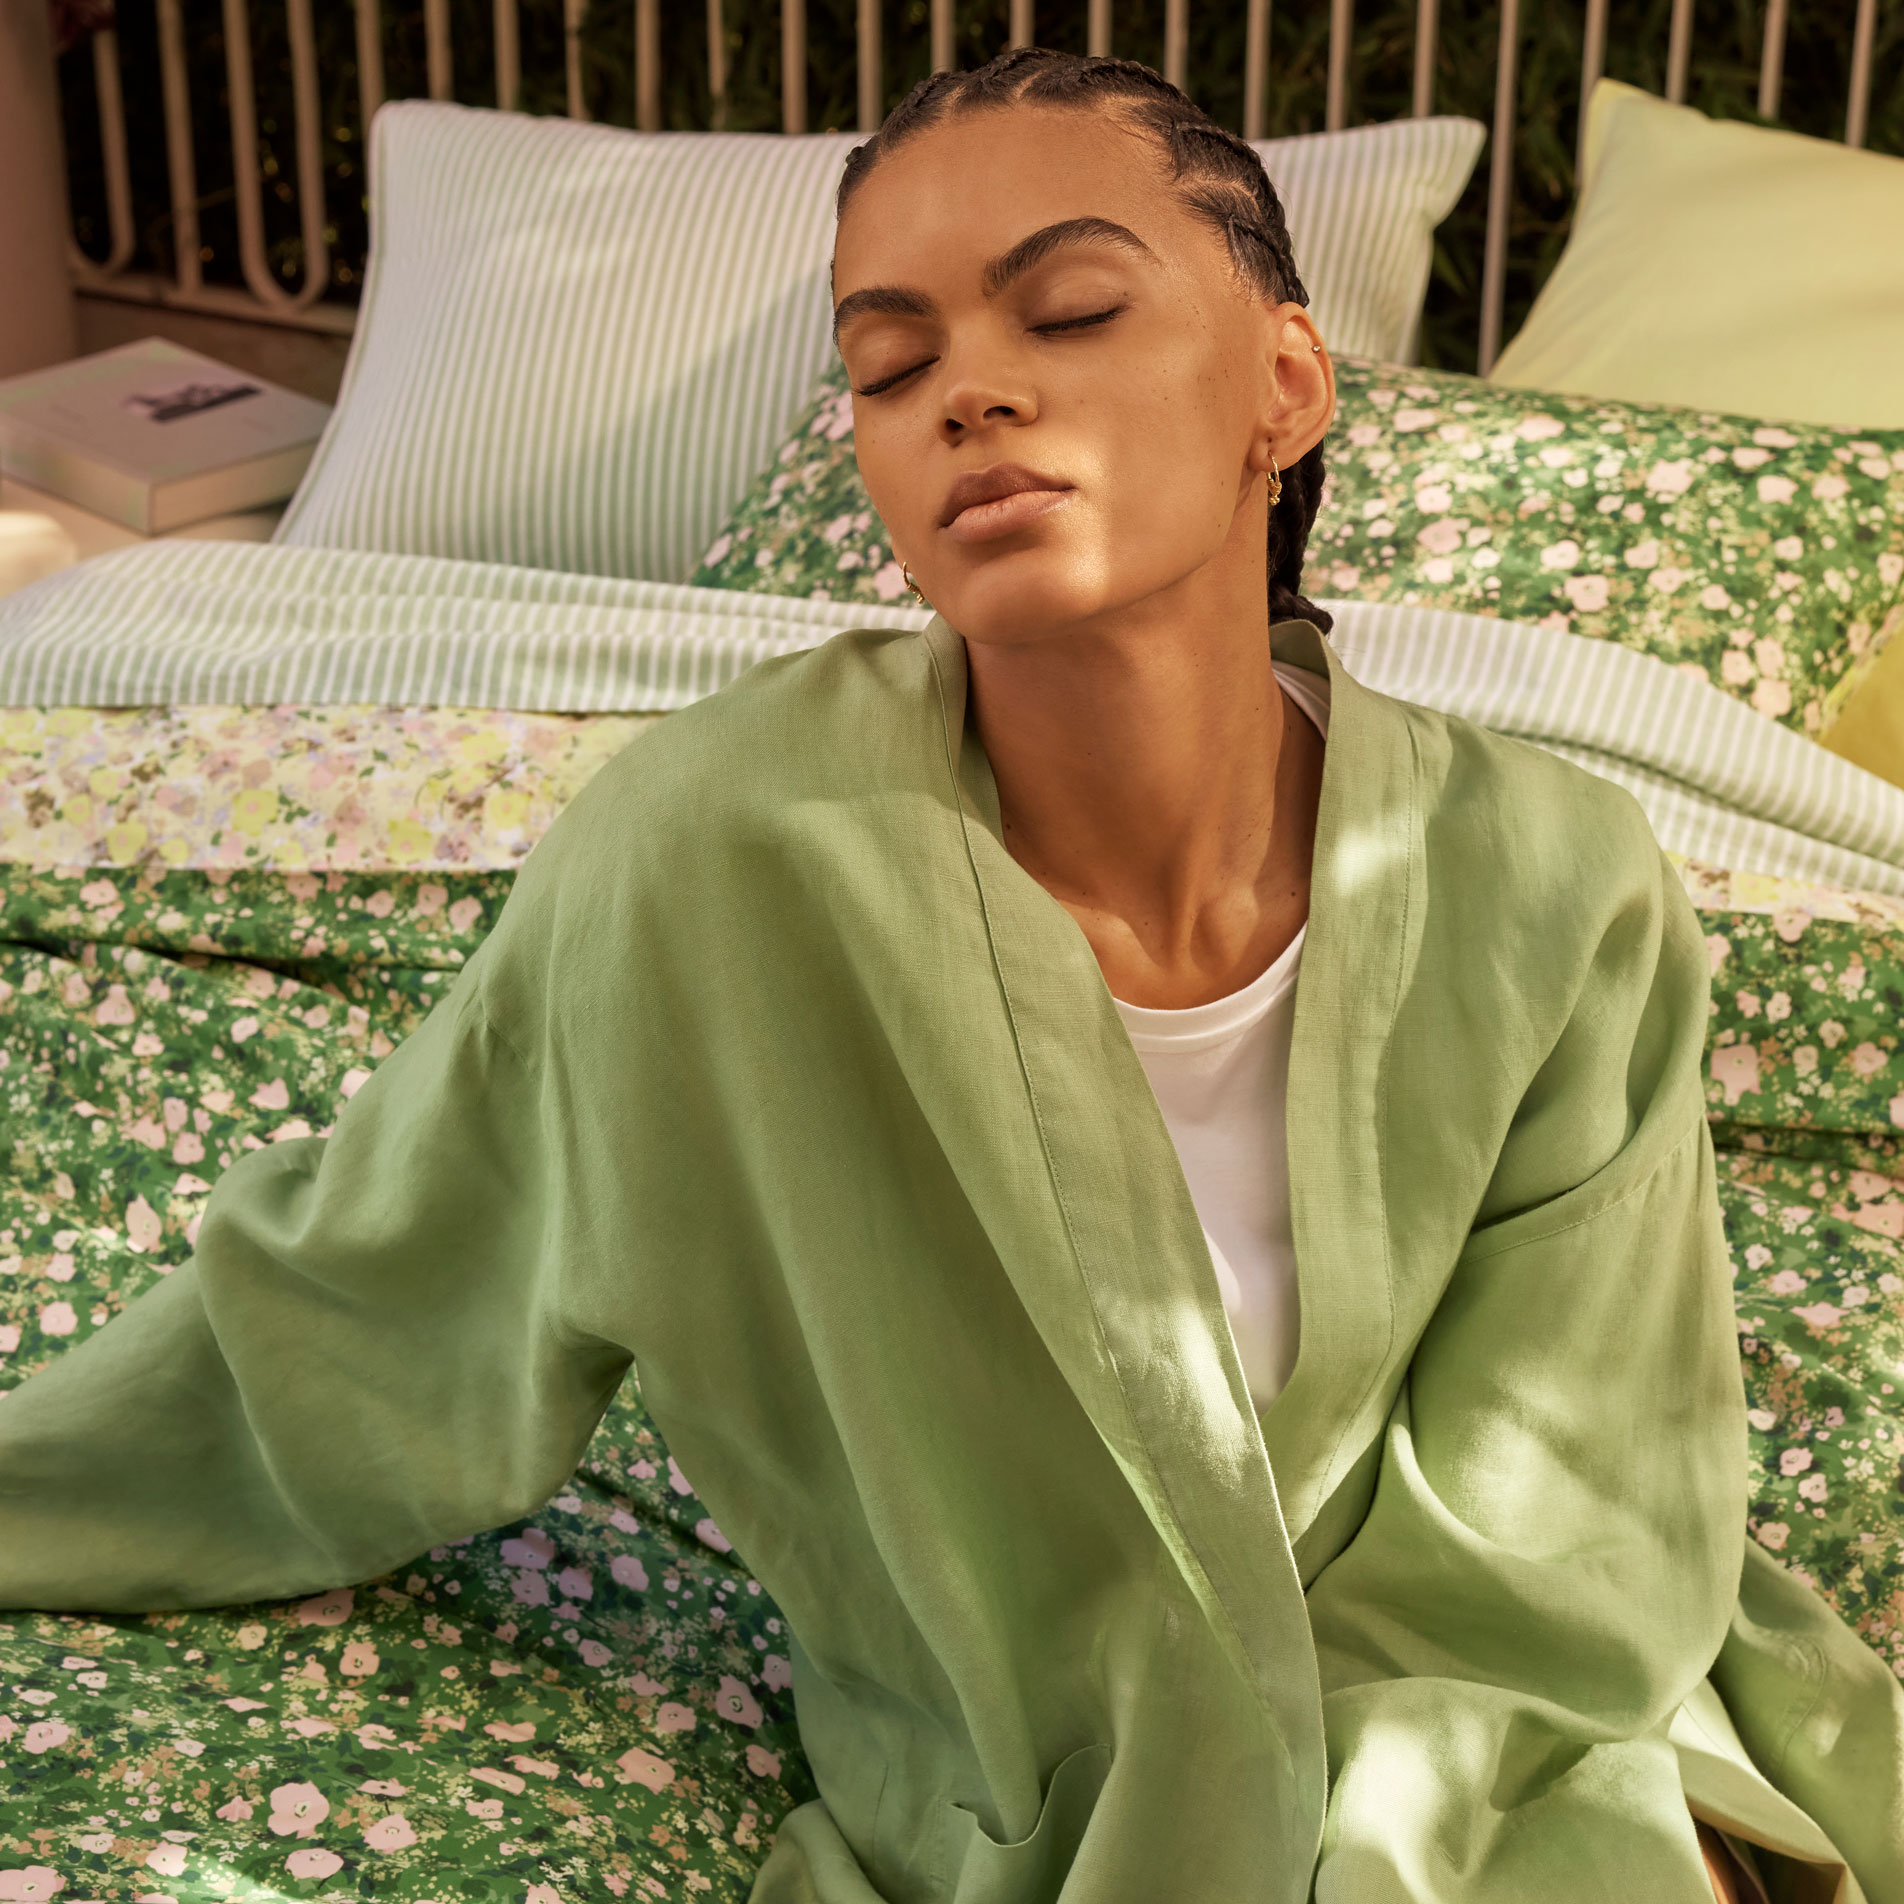 A young woman wearing a green linen robe and braided hair lounges on a floral print bed outside on a balcony, with dappled sun shining on her face